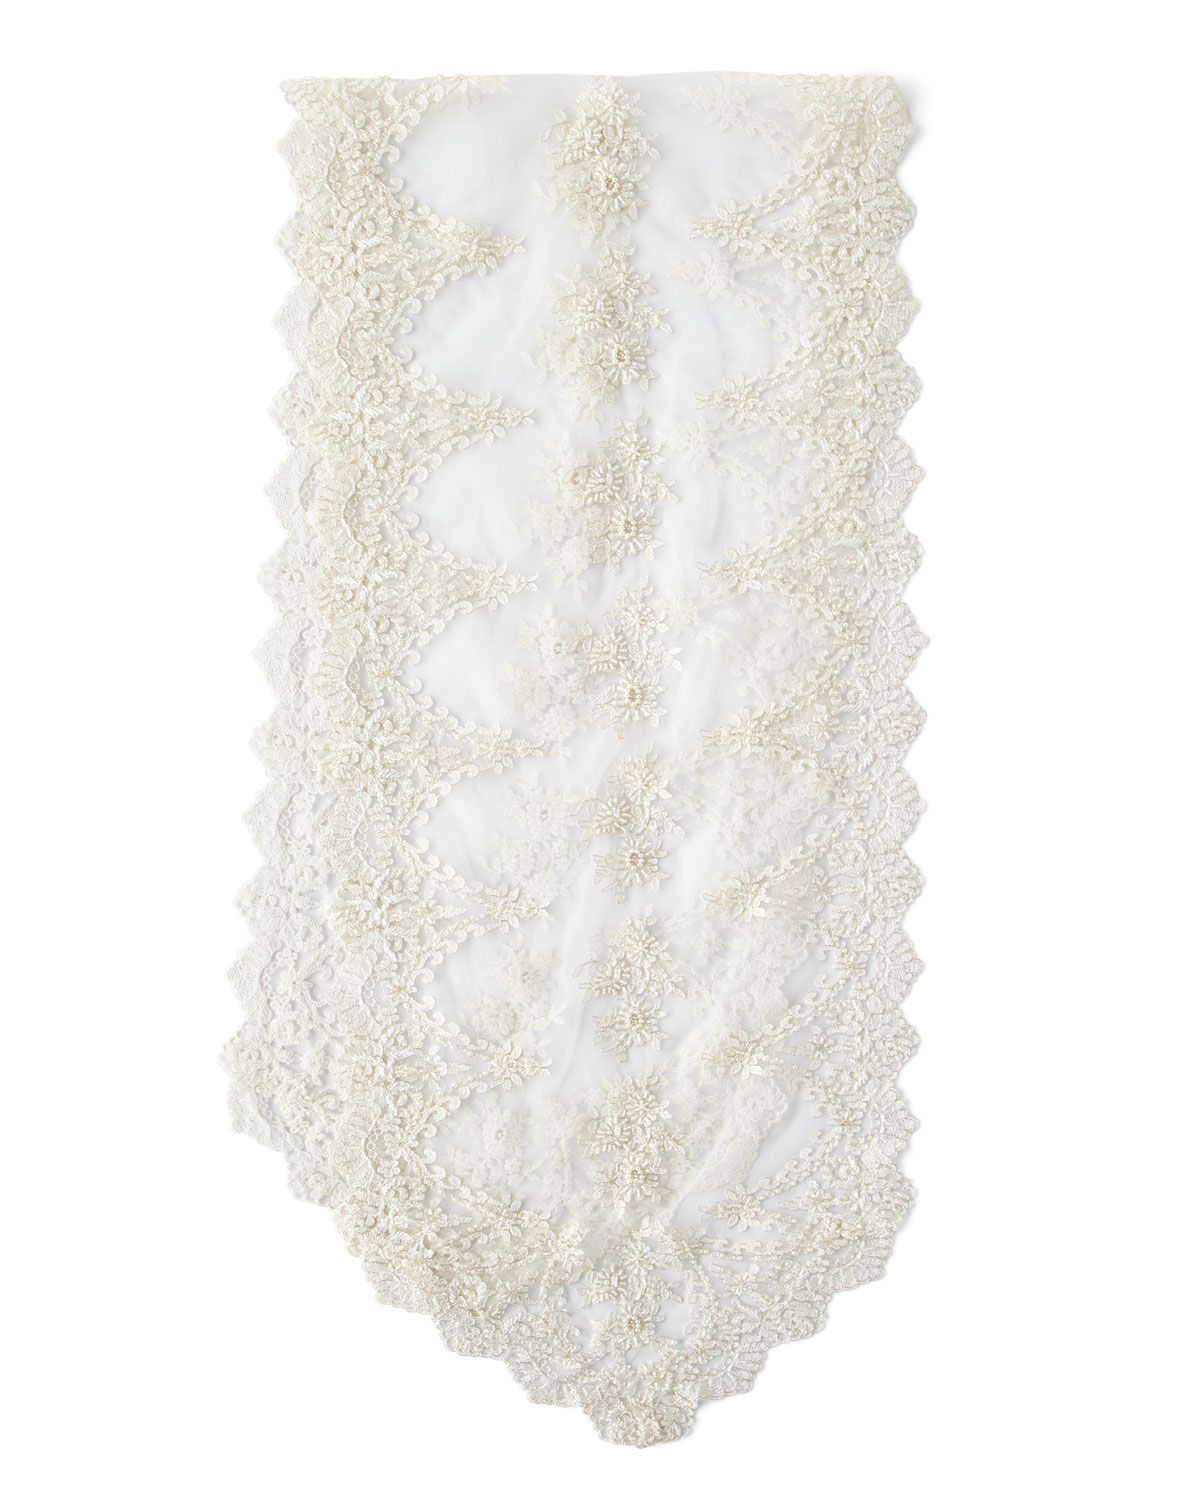 Lace and Pearl Embroidered Table Runner | Neiman Marcus